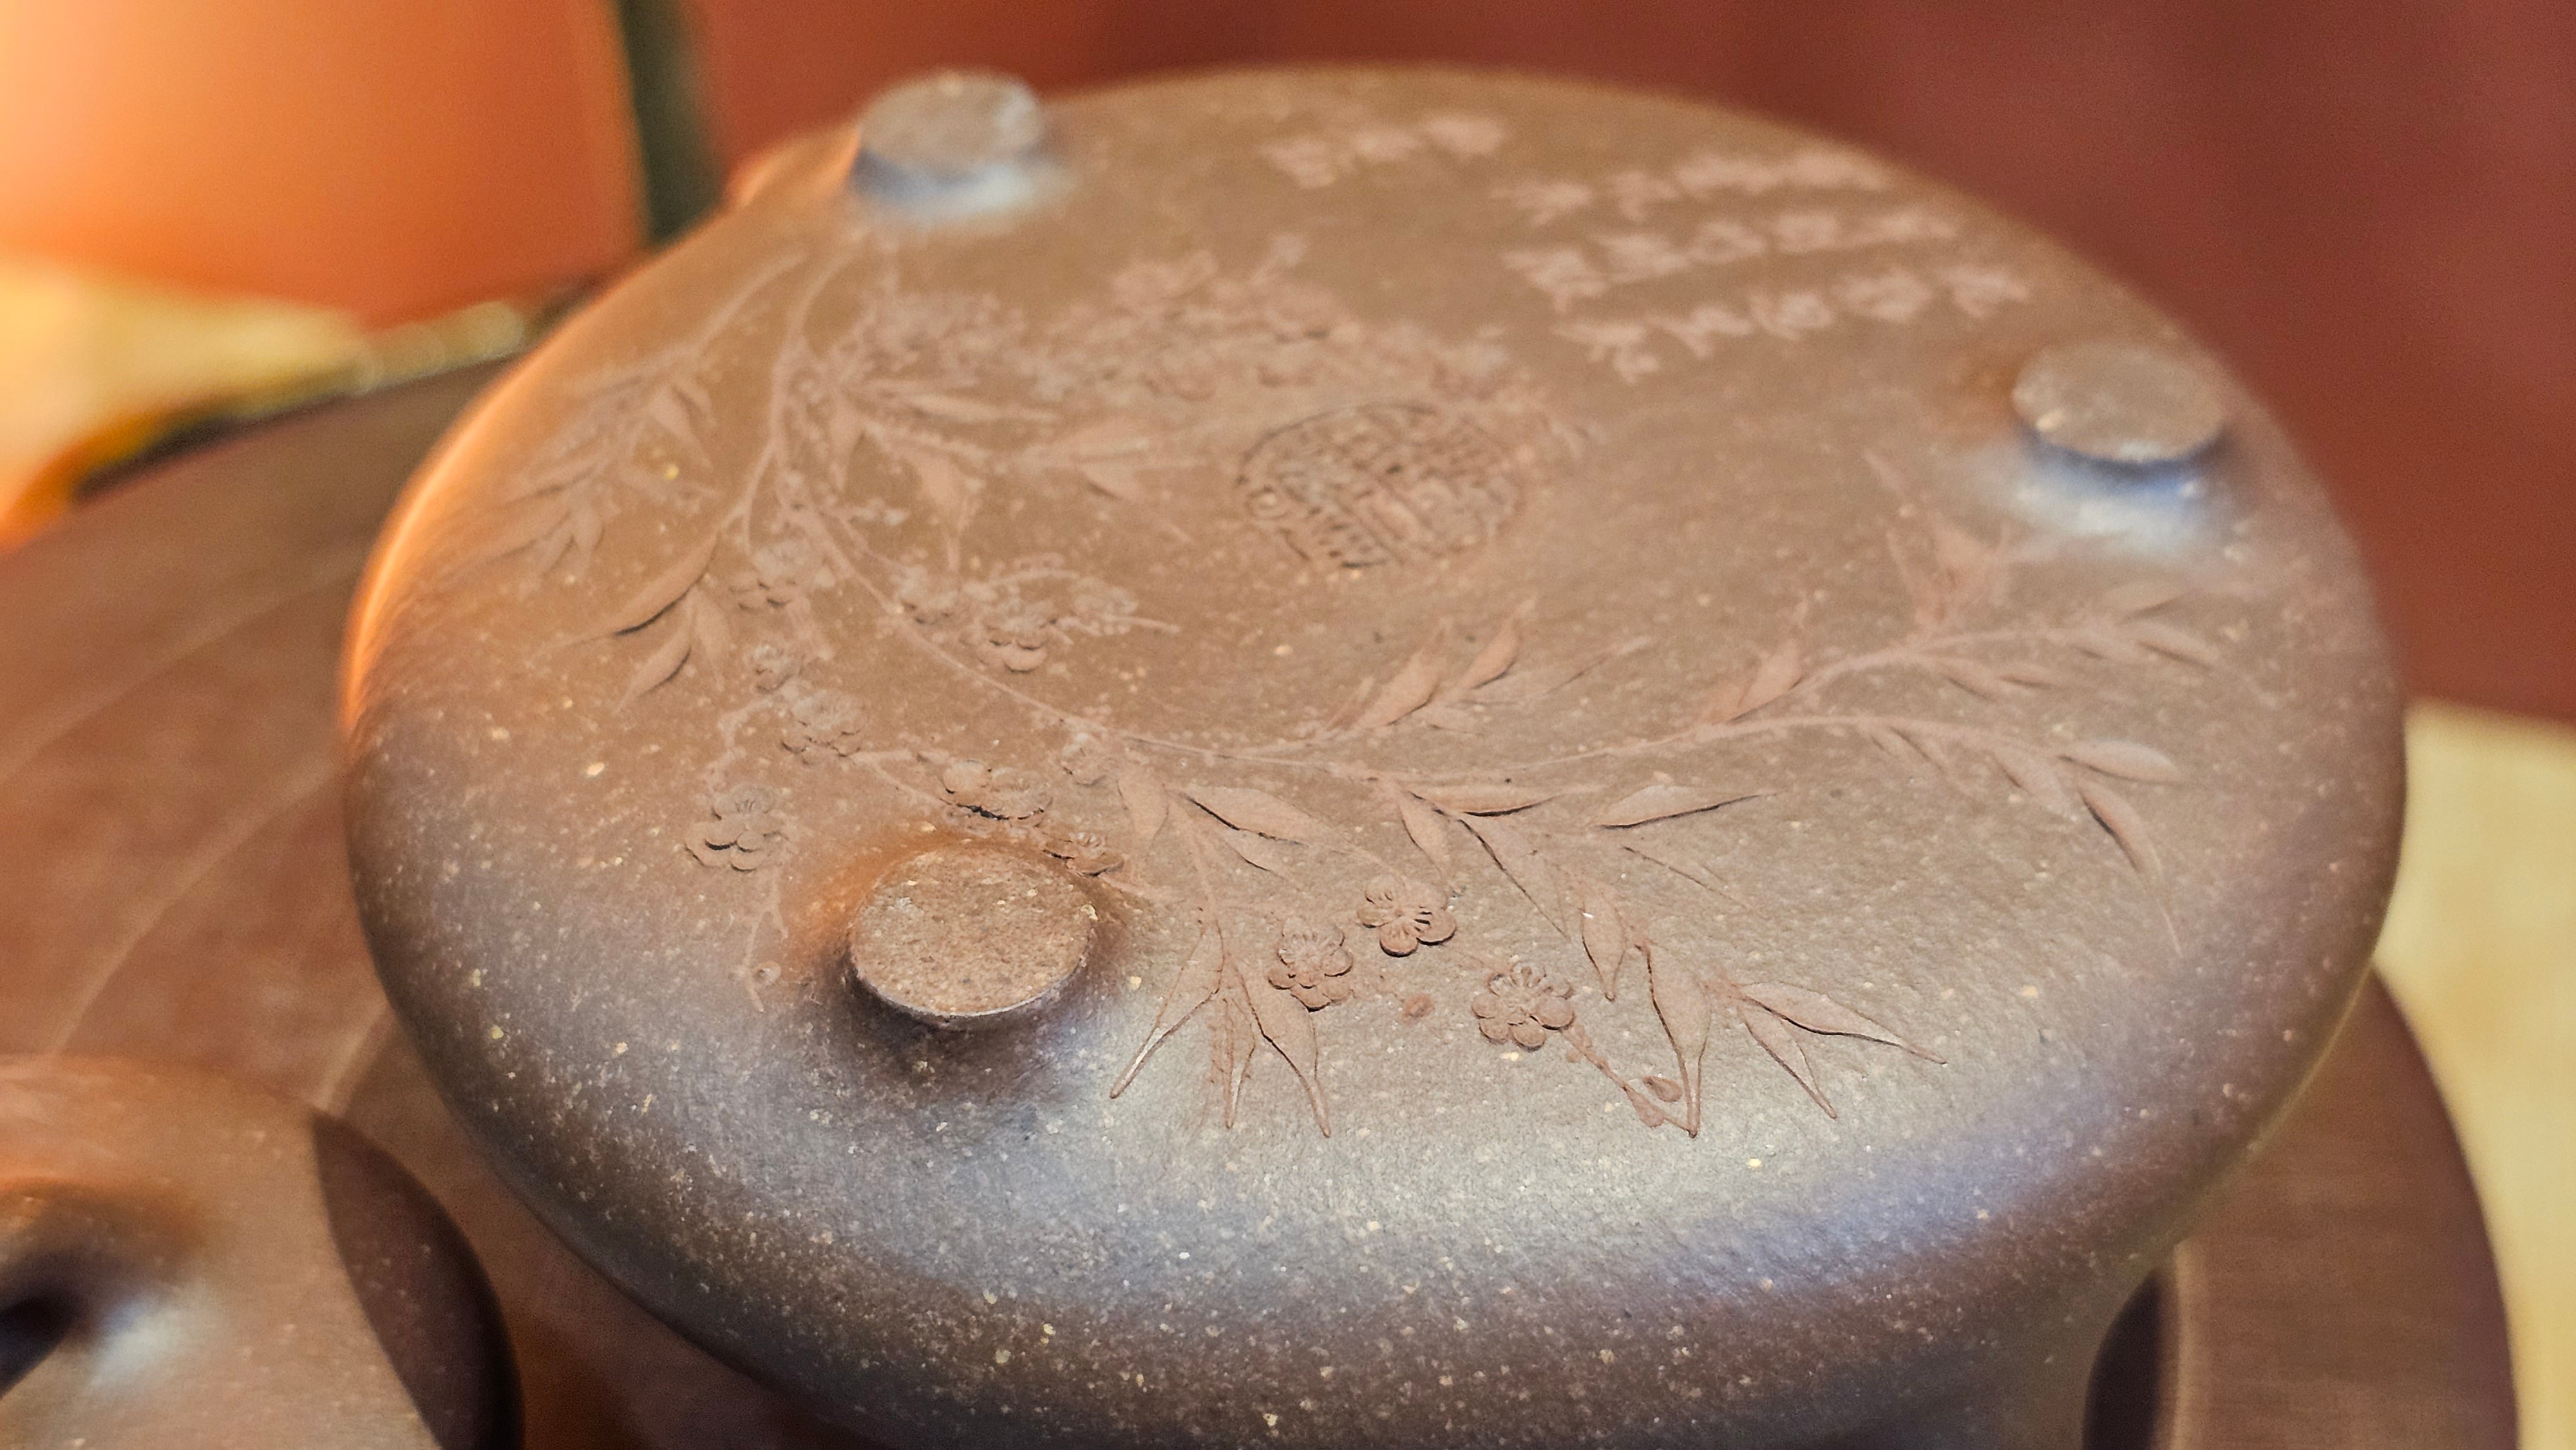 Specially Invited Guest, Esteemed Craftsman Zhuo Shi 琢石, performing this EXQUISITE WHOLE-BODY Clay Sculpting 泥绘 of Plum Blossoms 梅花, on this Zi Ye Shi Piao 子冶石瓢 by his colleague Chen Huan 陈歡。